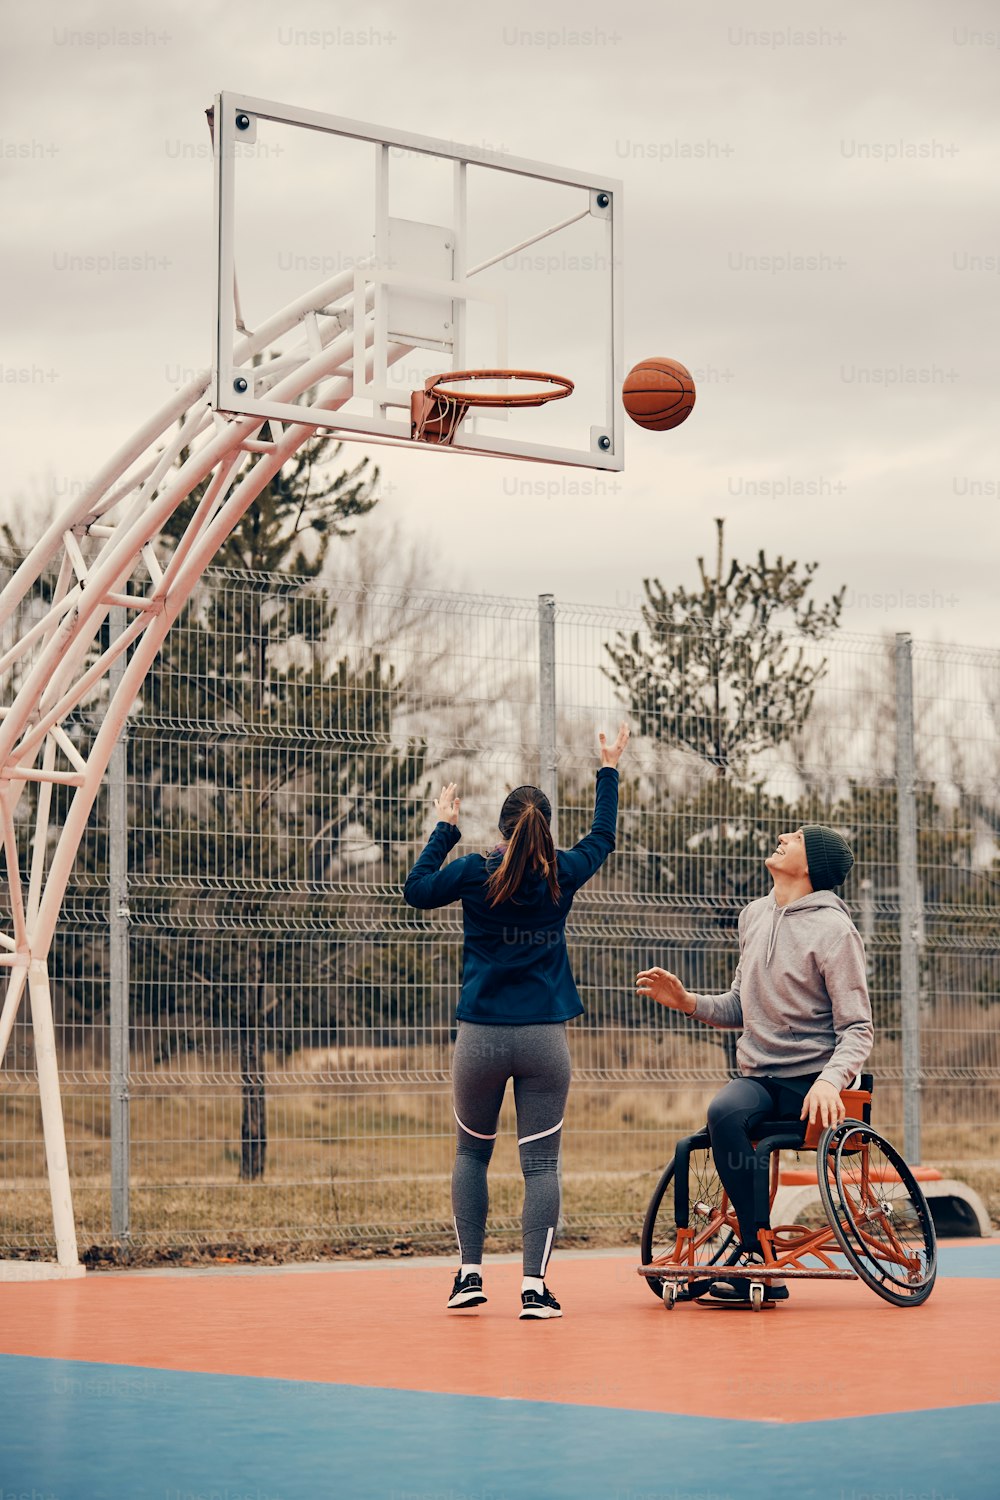 Rear view of athletic woman shooting at the hoop while playing basketball with a friend who uses wheelchair.